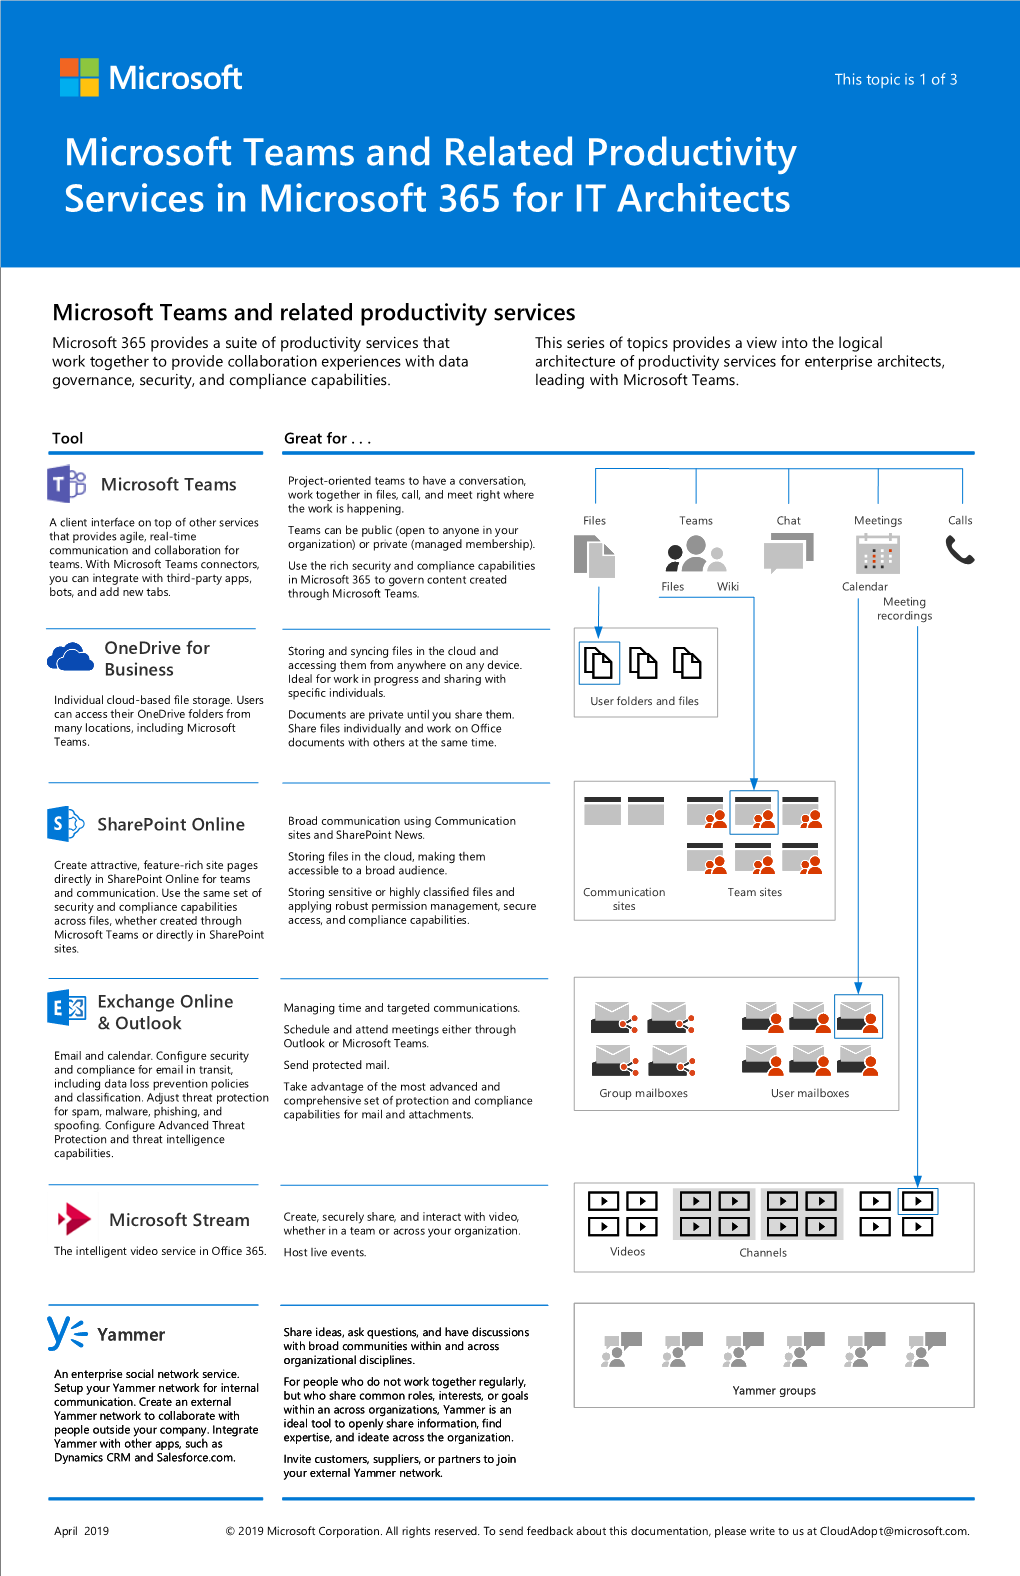 Microsoft Teams and Related Productivity Services in Microsoft 365 for IT Architects